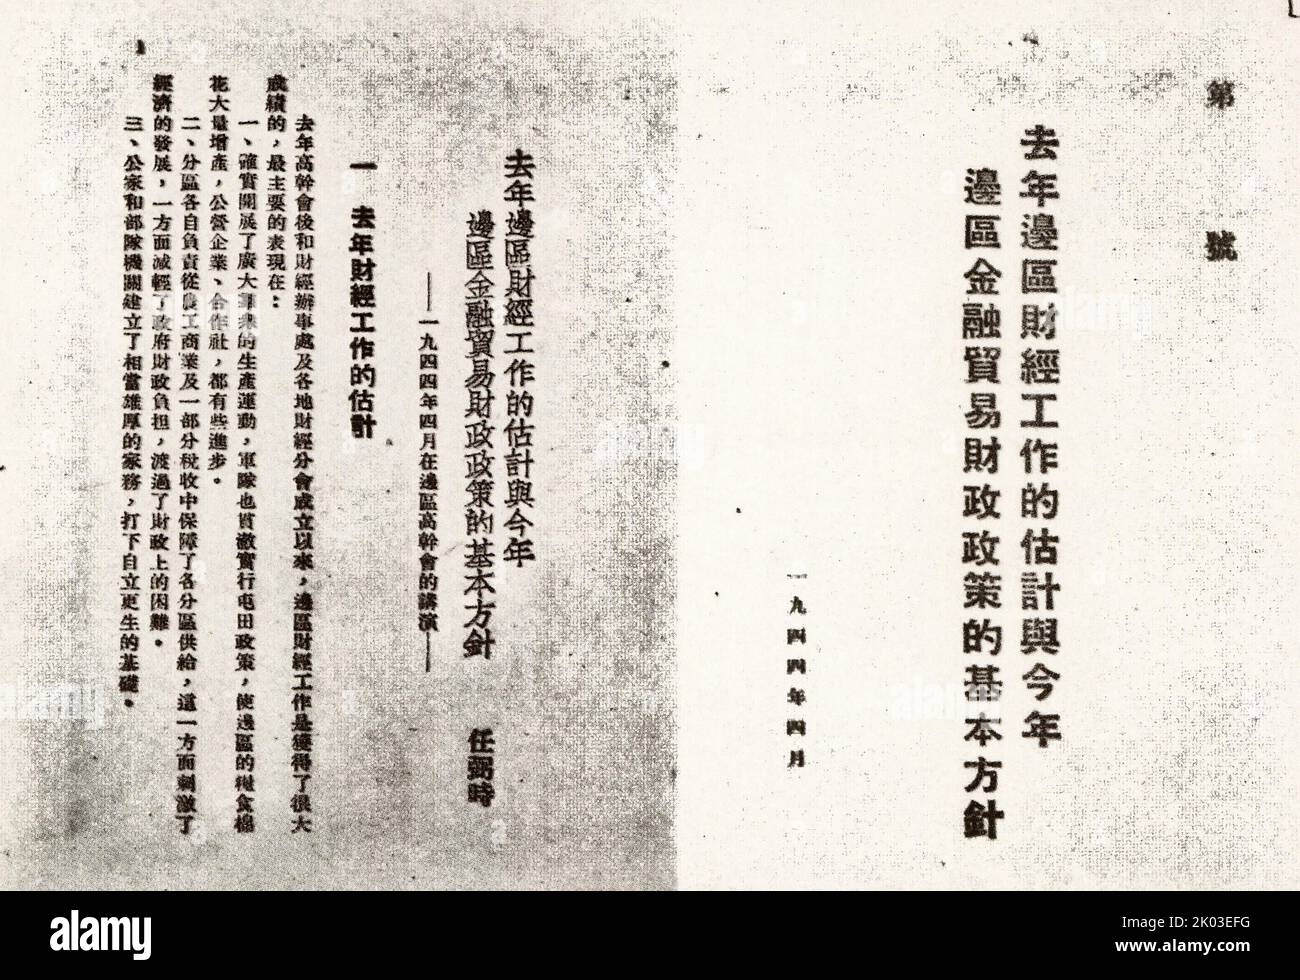 Ren Bishi made a report at the border region high-level cadre meeting, clarifying the basic guidelines for the border region's financial work. Ren Bishi was a military and political leader in the early Chinese Communist Party. In the early 1930s, Stock Photo